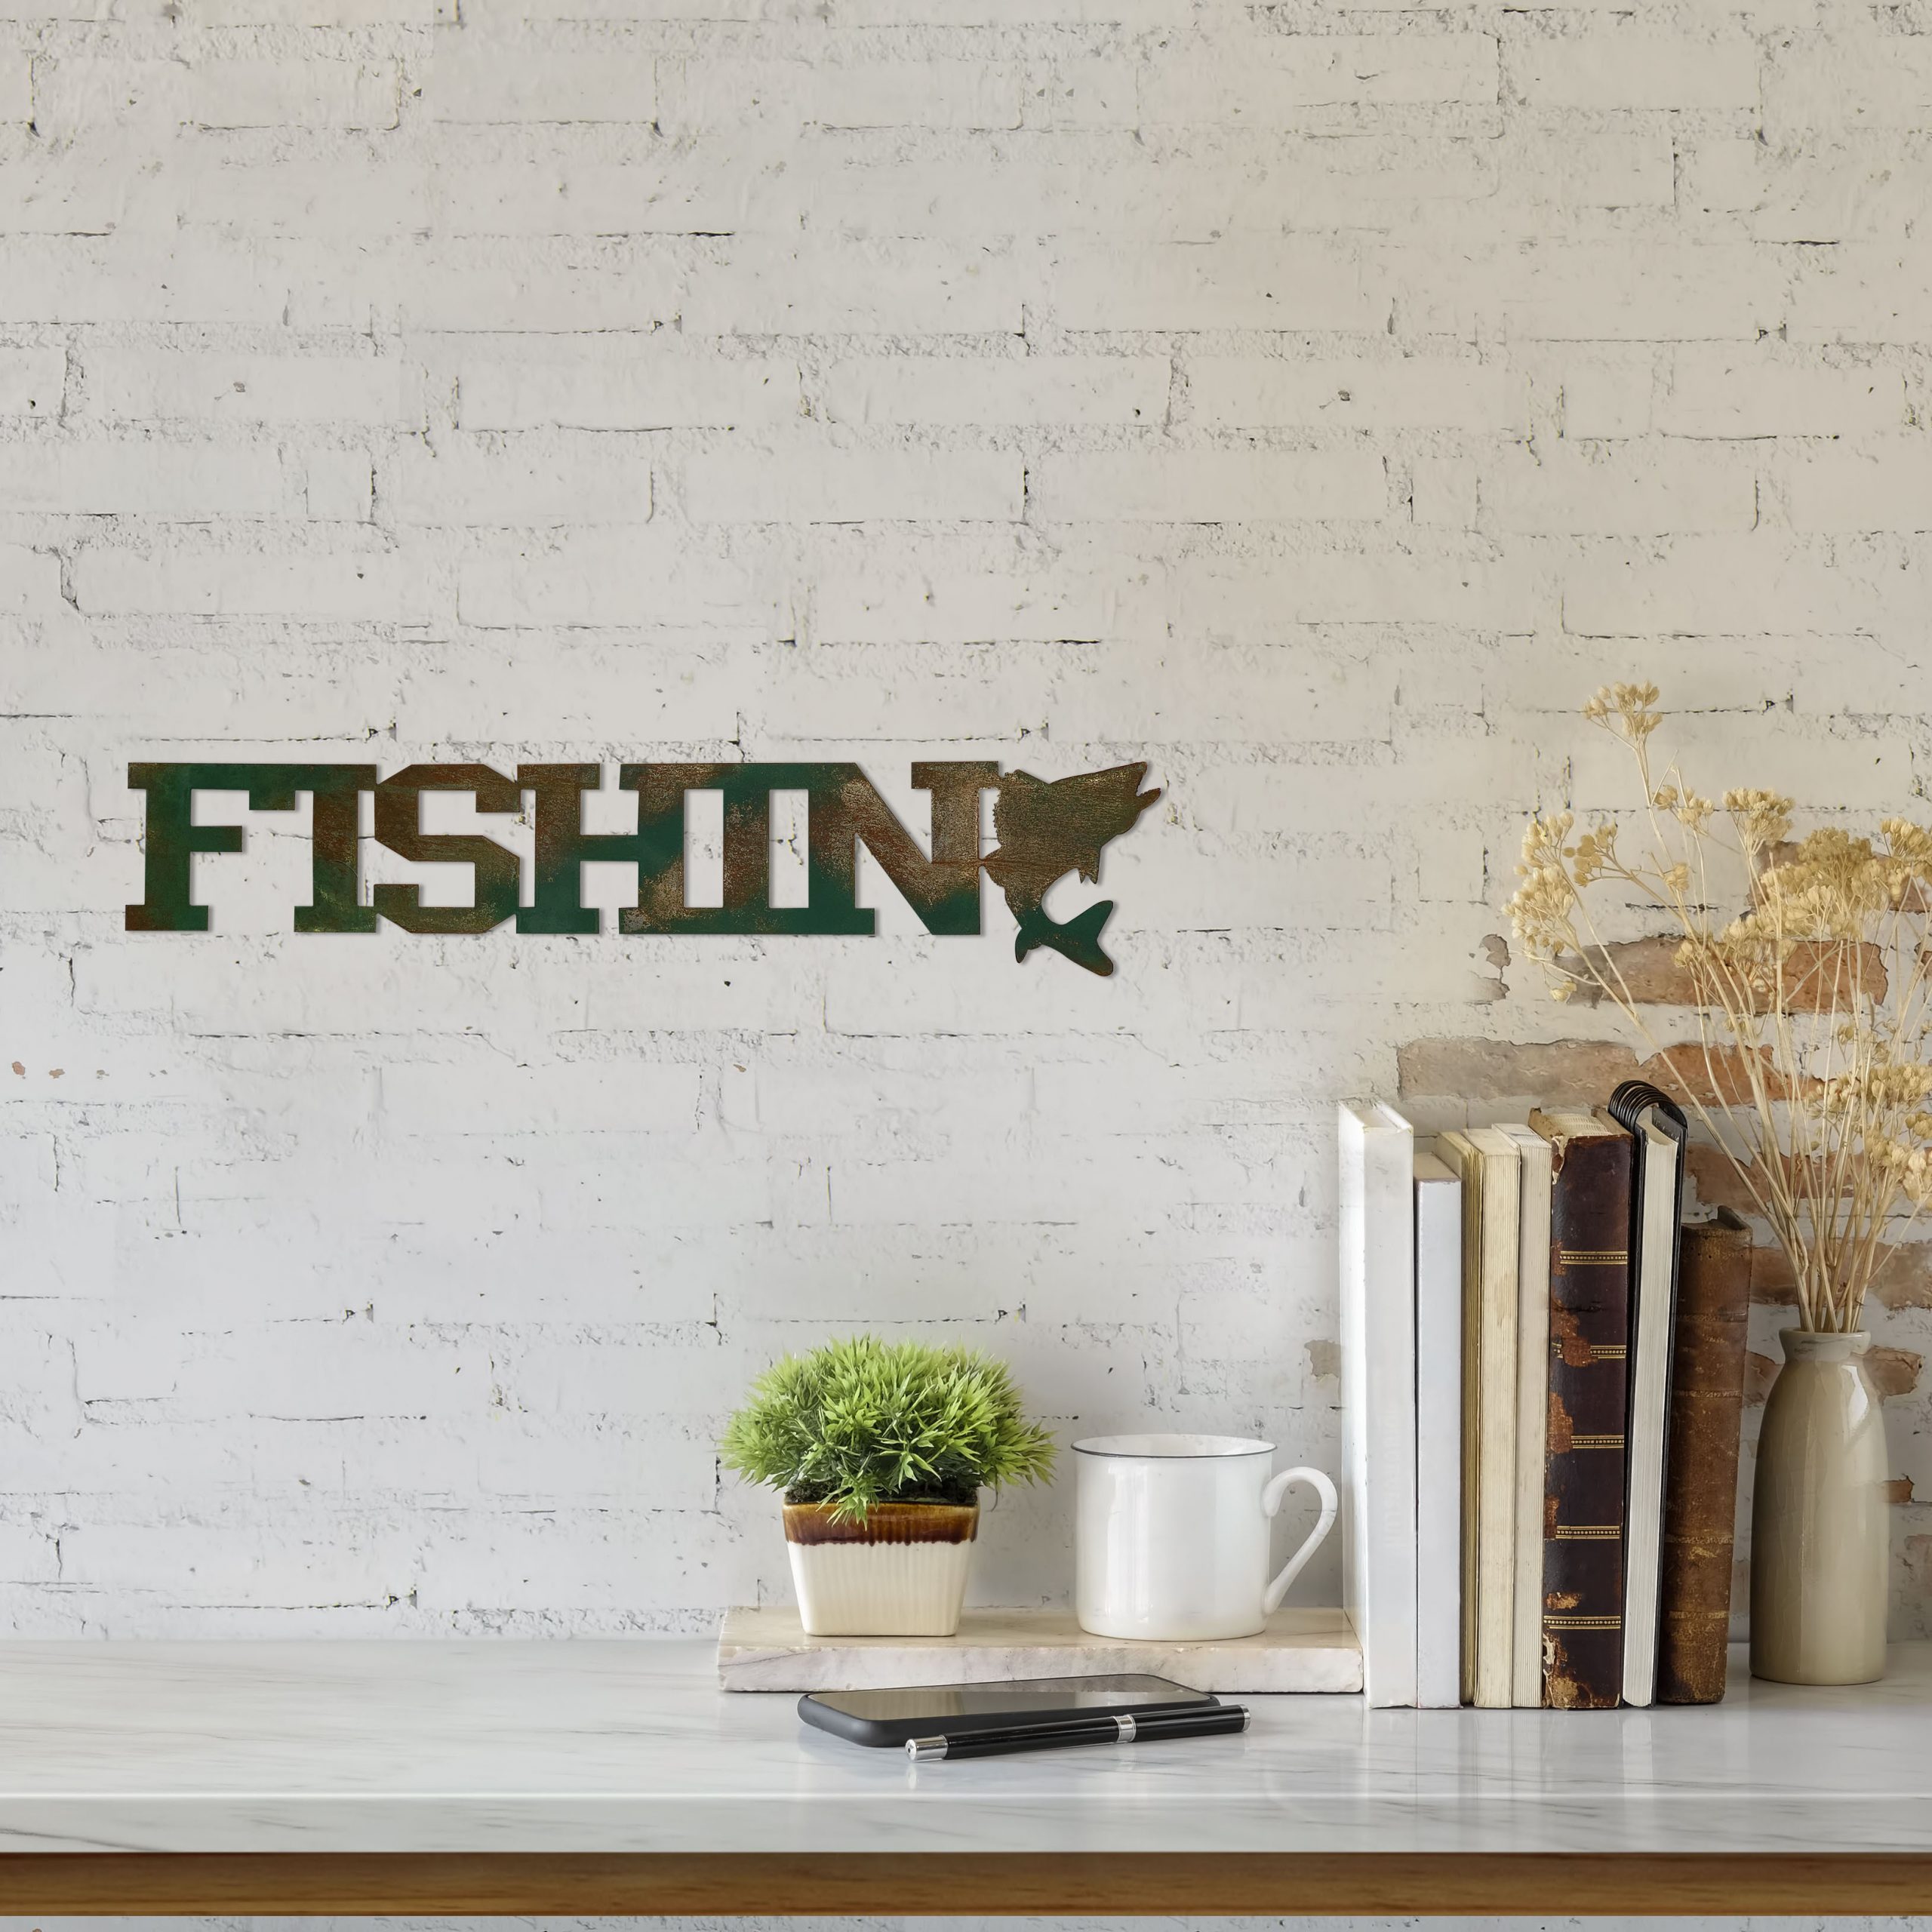 fishing-word-over-counter-scaled